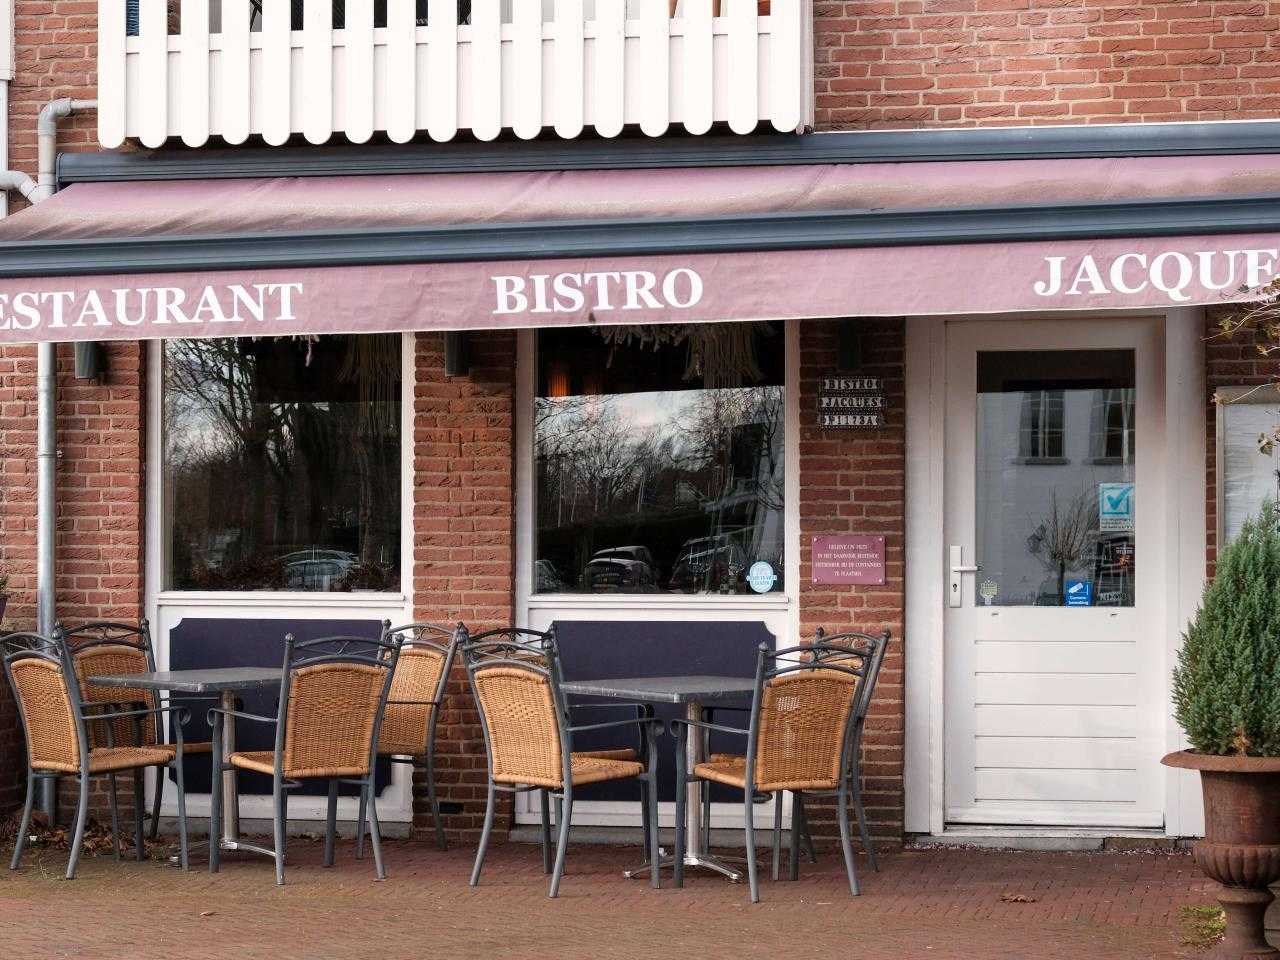 Bistro Jacques on the outside